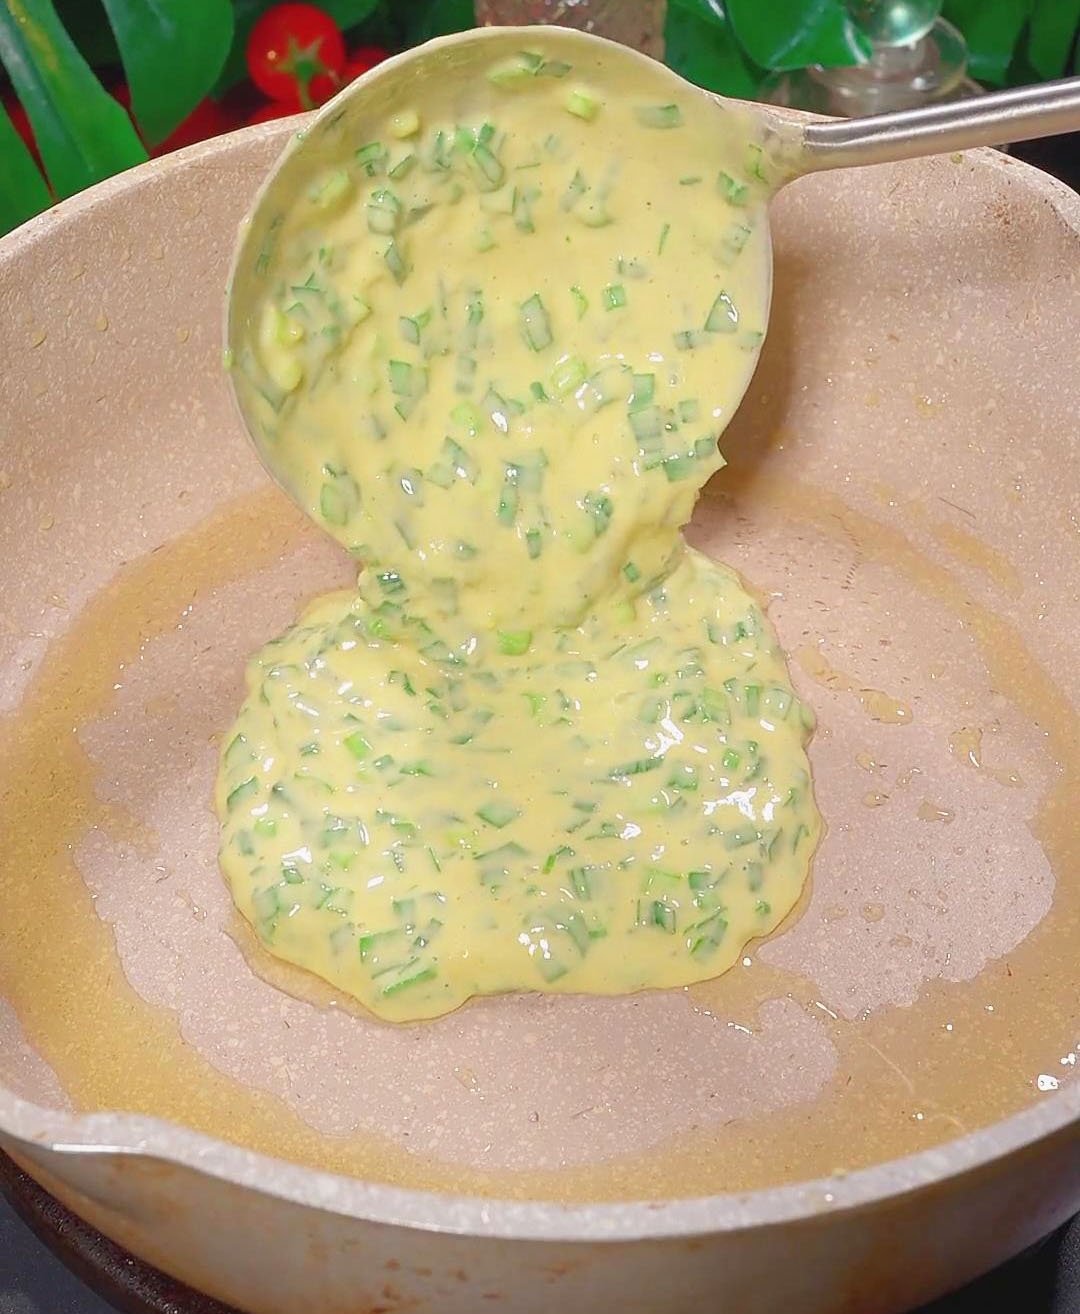 Pour the mixed batter into the pan